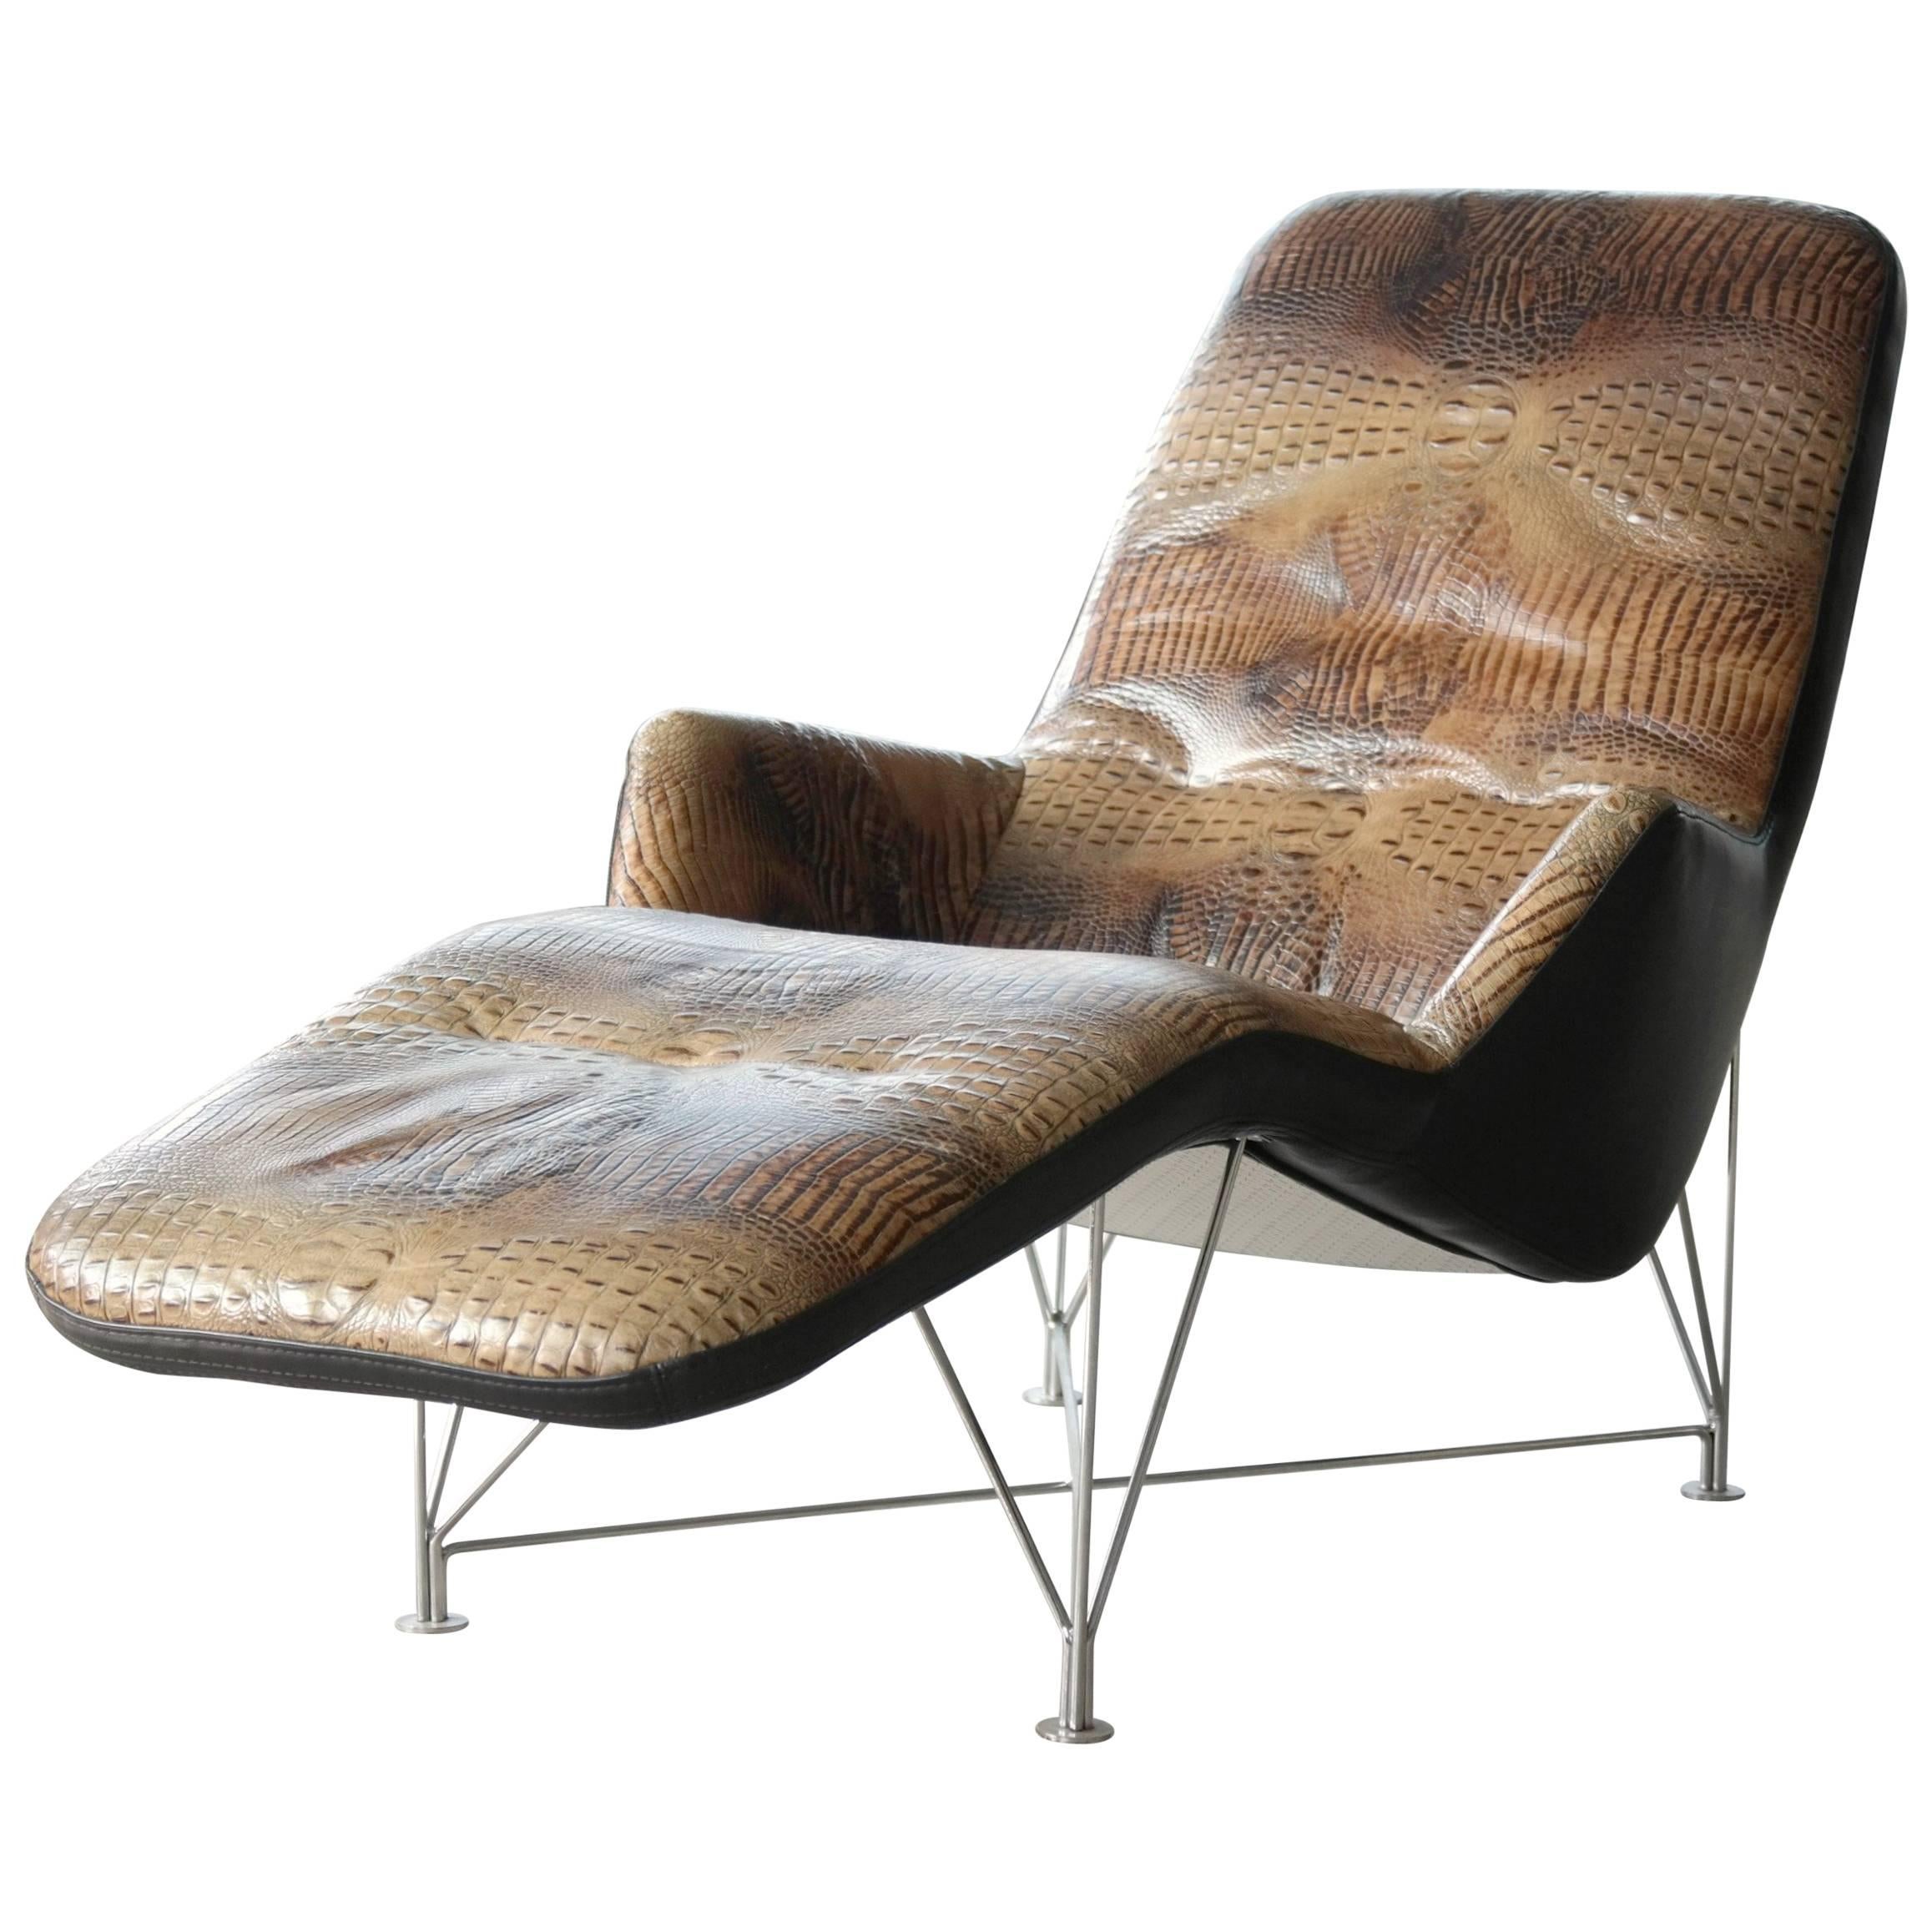 Kenneth Bergenblad Superspider Chaise Longue in Crocodile Leather for Dux  Sweden at 1stDibs | dux superspider, superspider dux, superspider classic